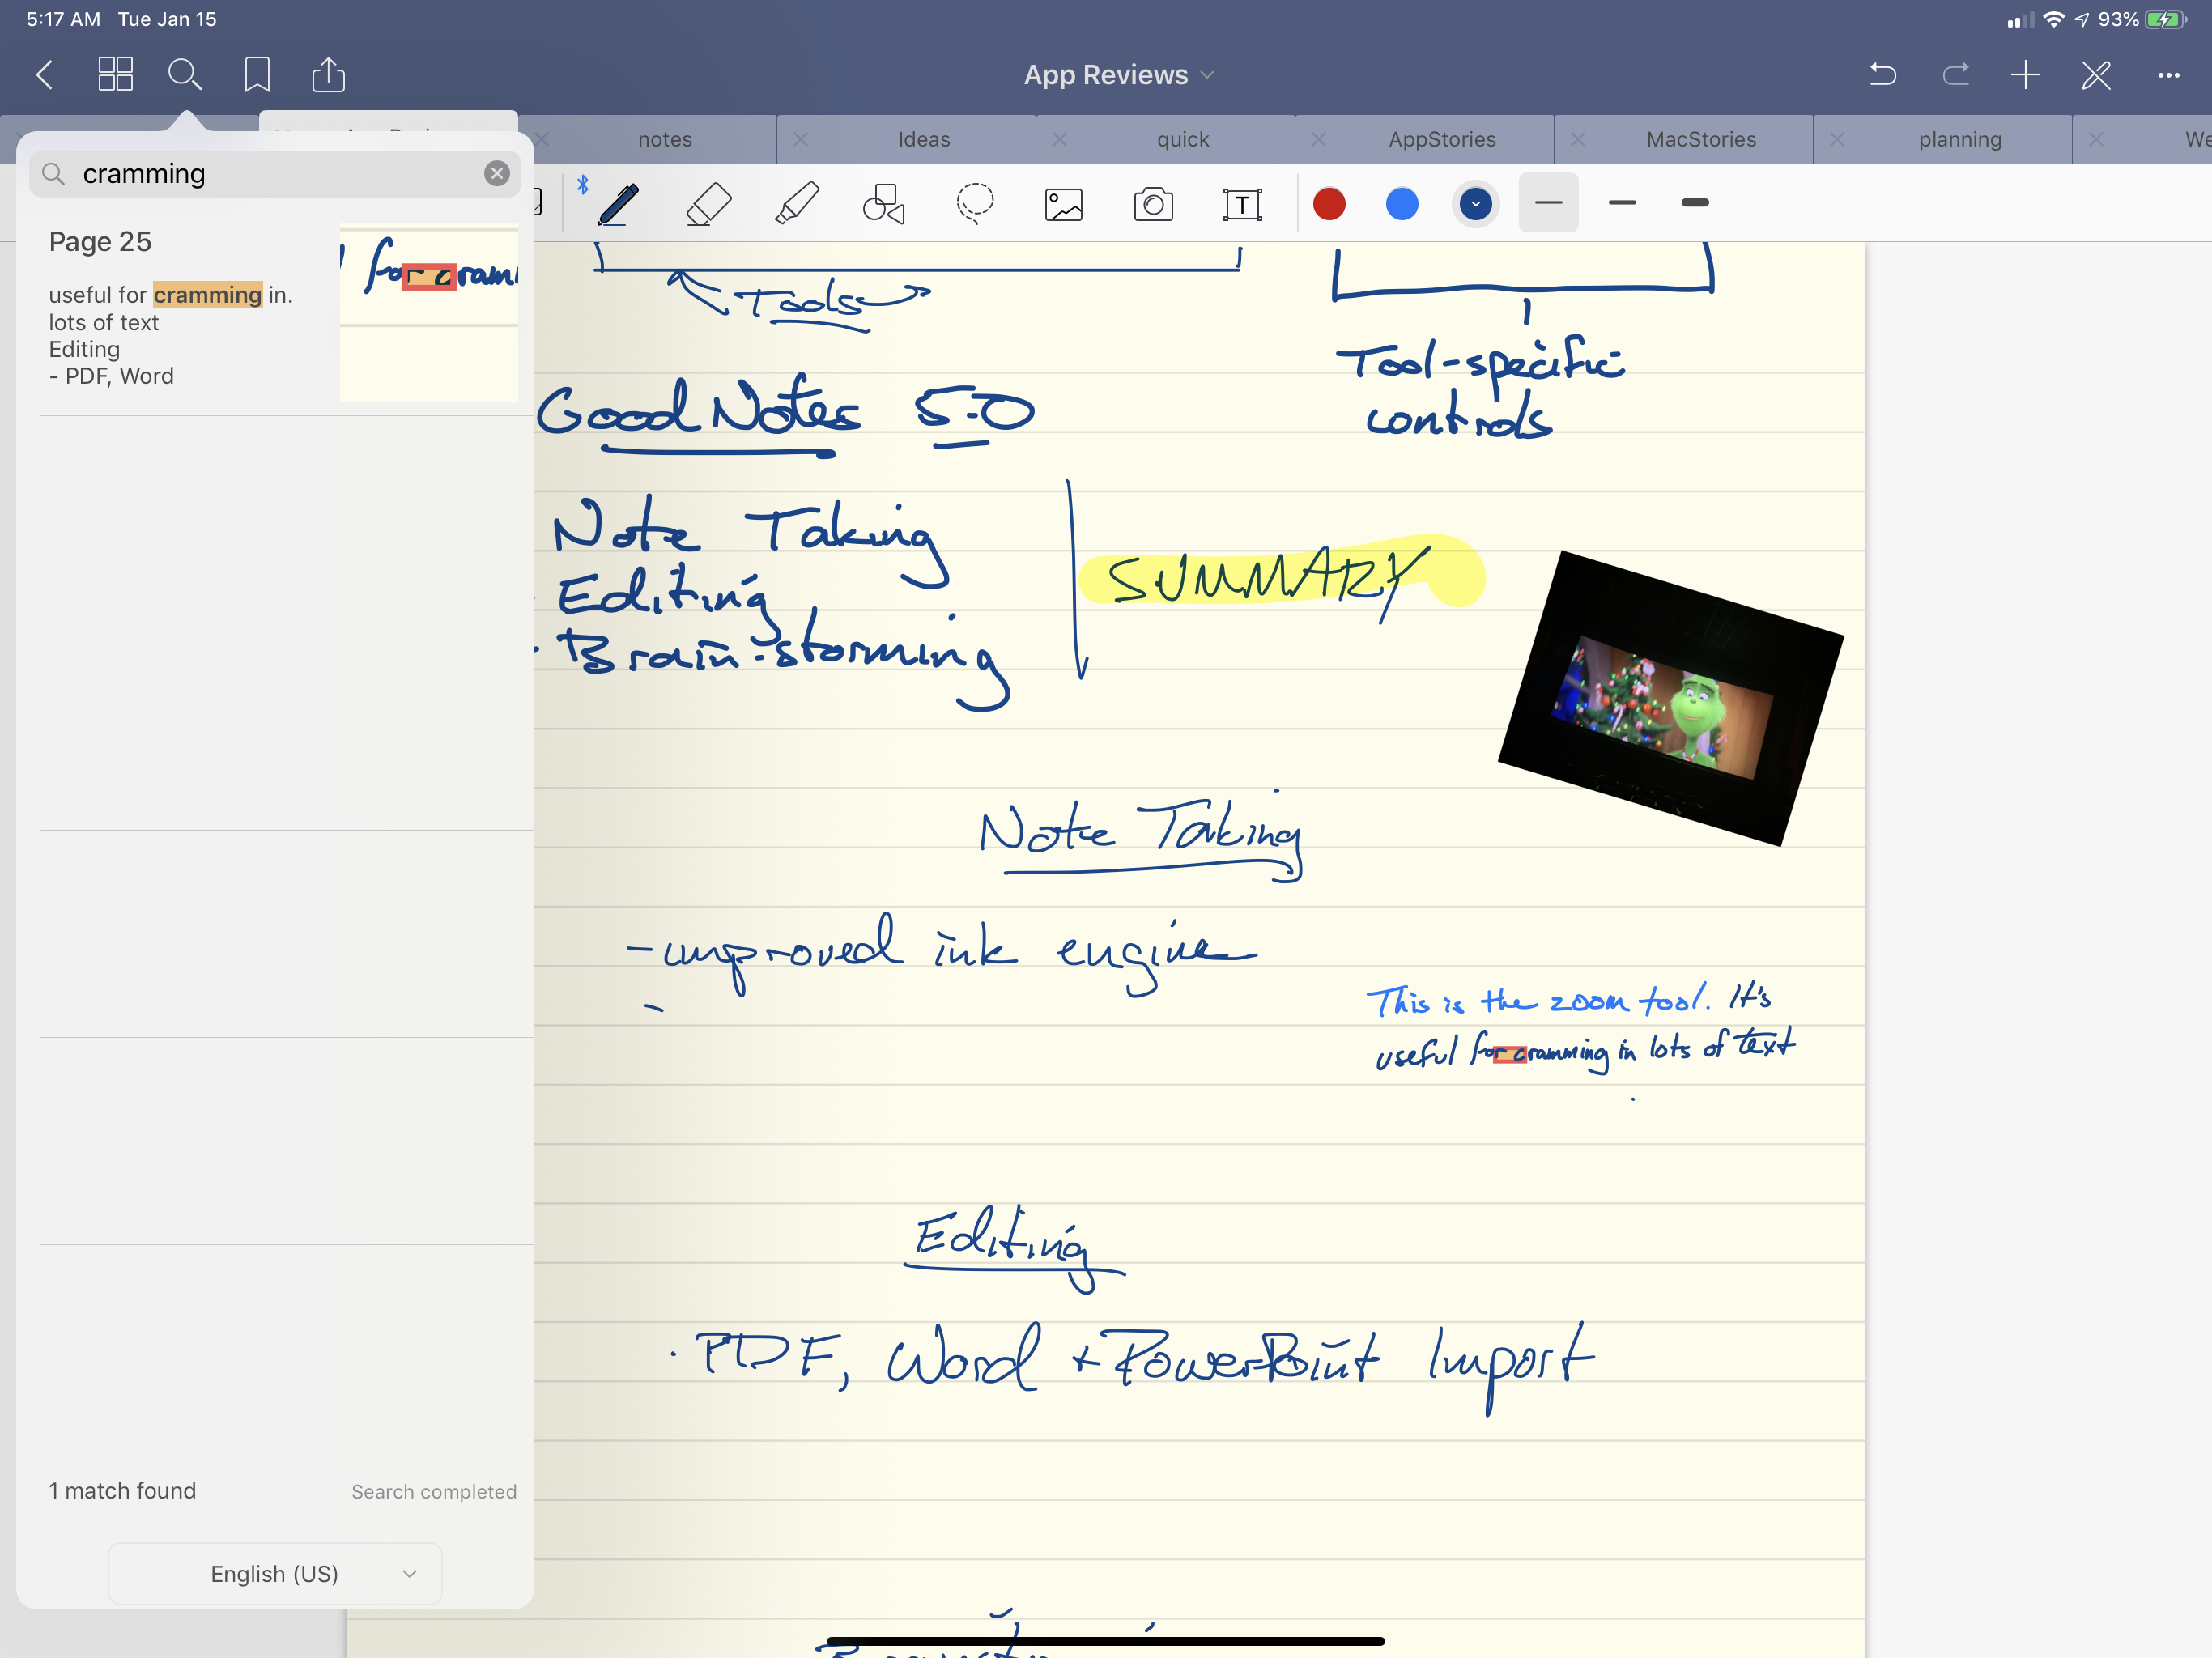 Search is also available inside individual notebooks.